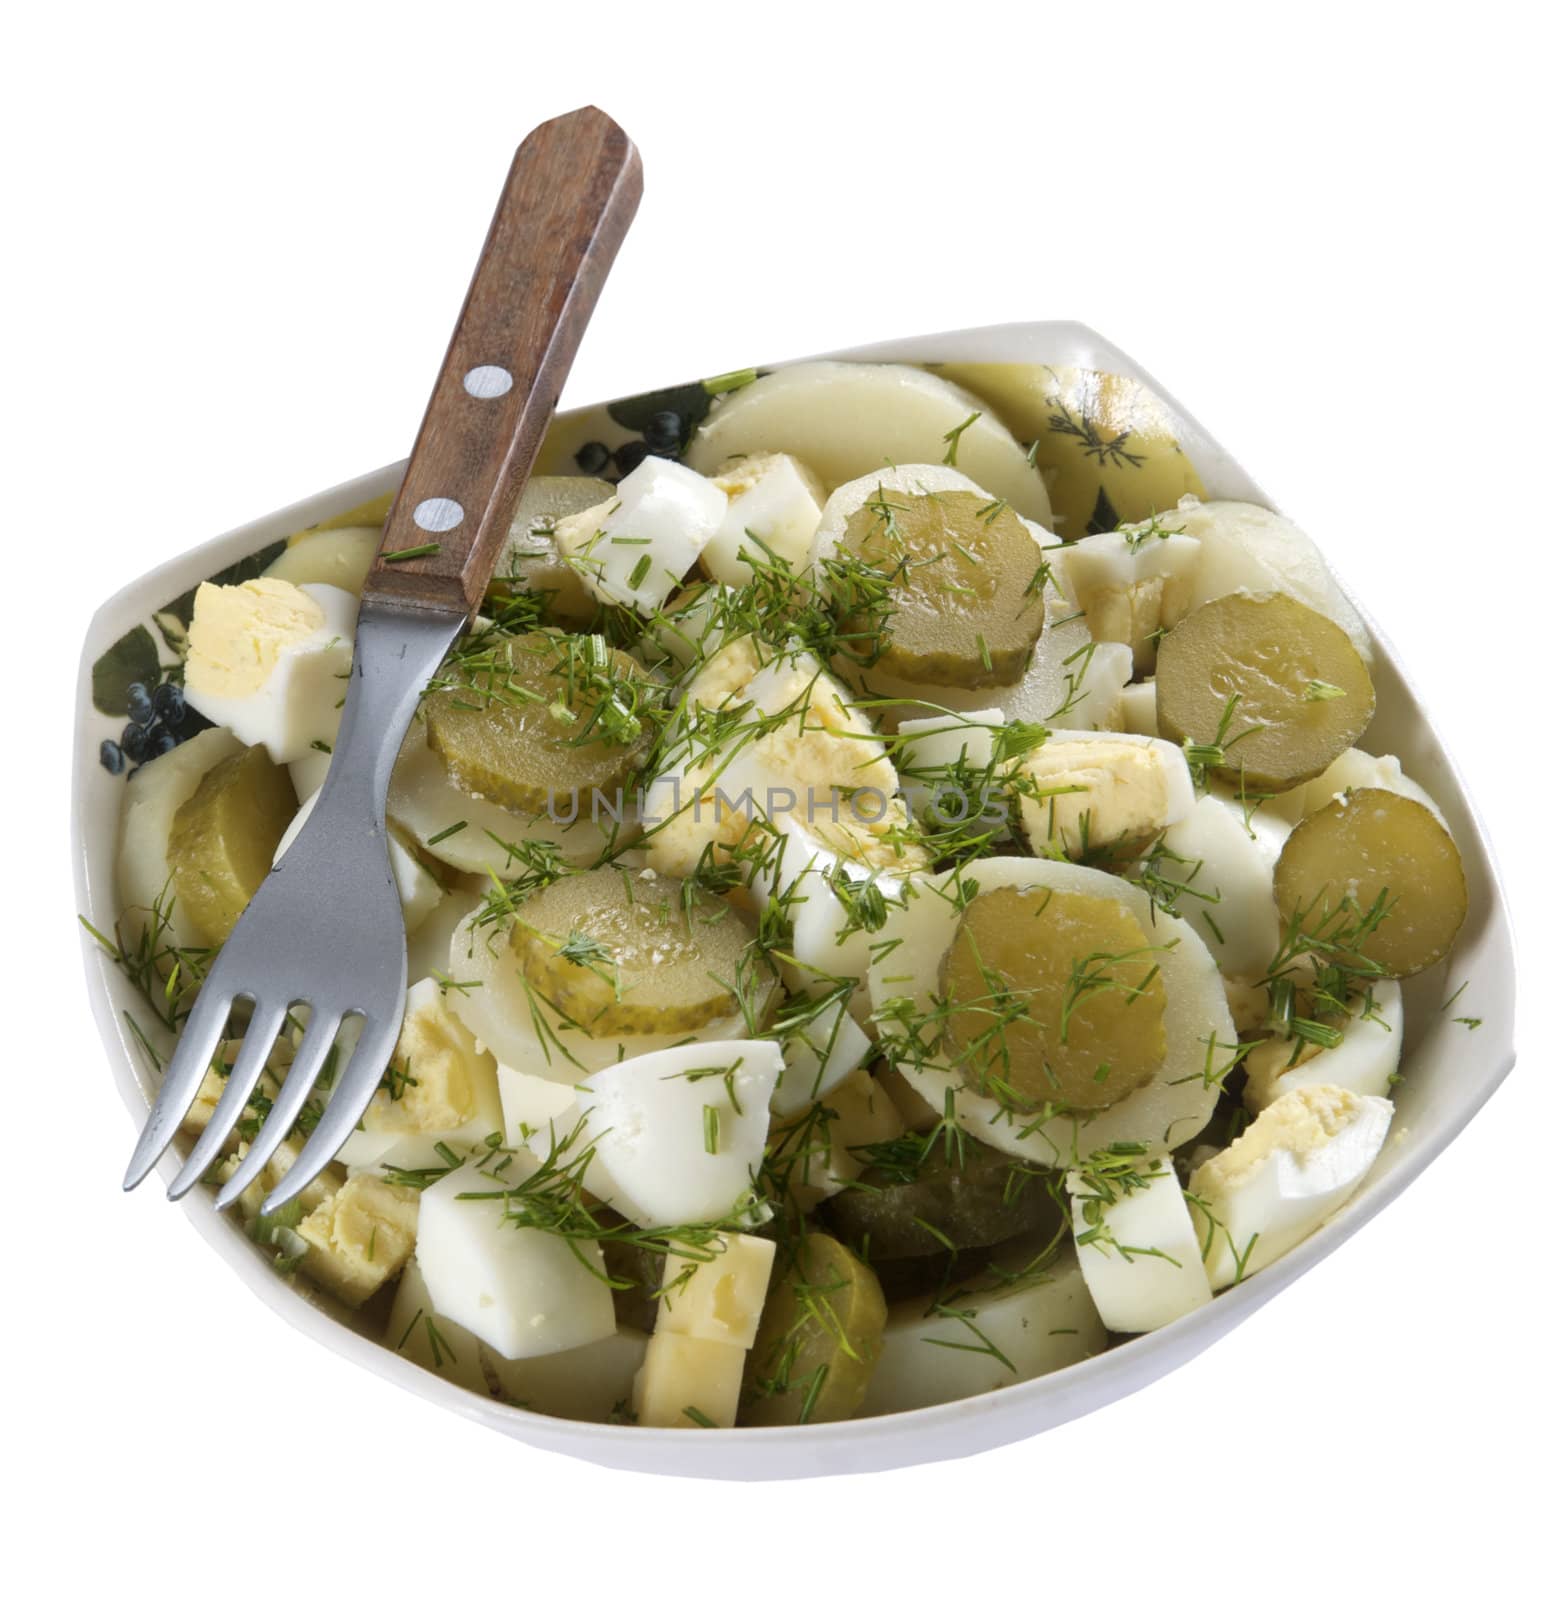 A plate of potato salad on white background